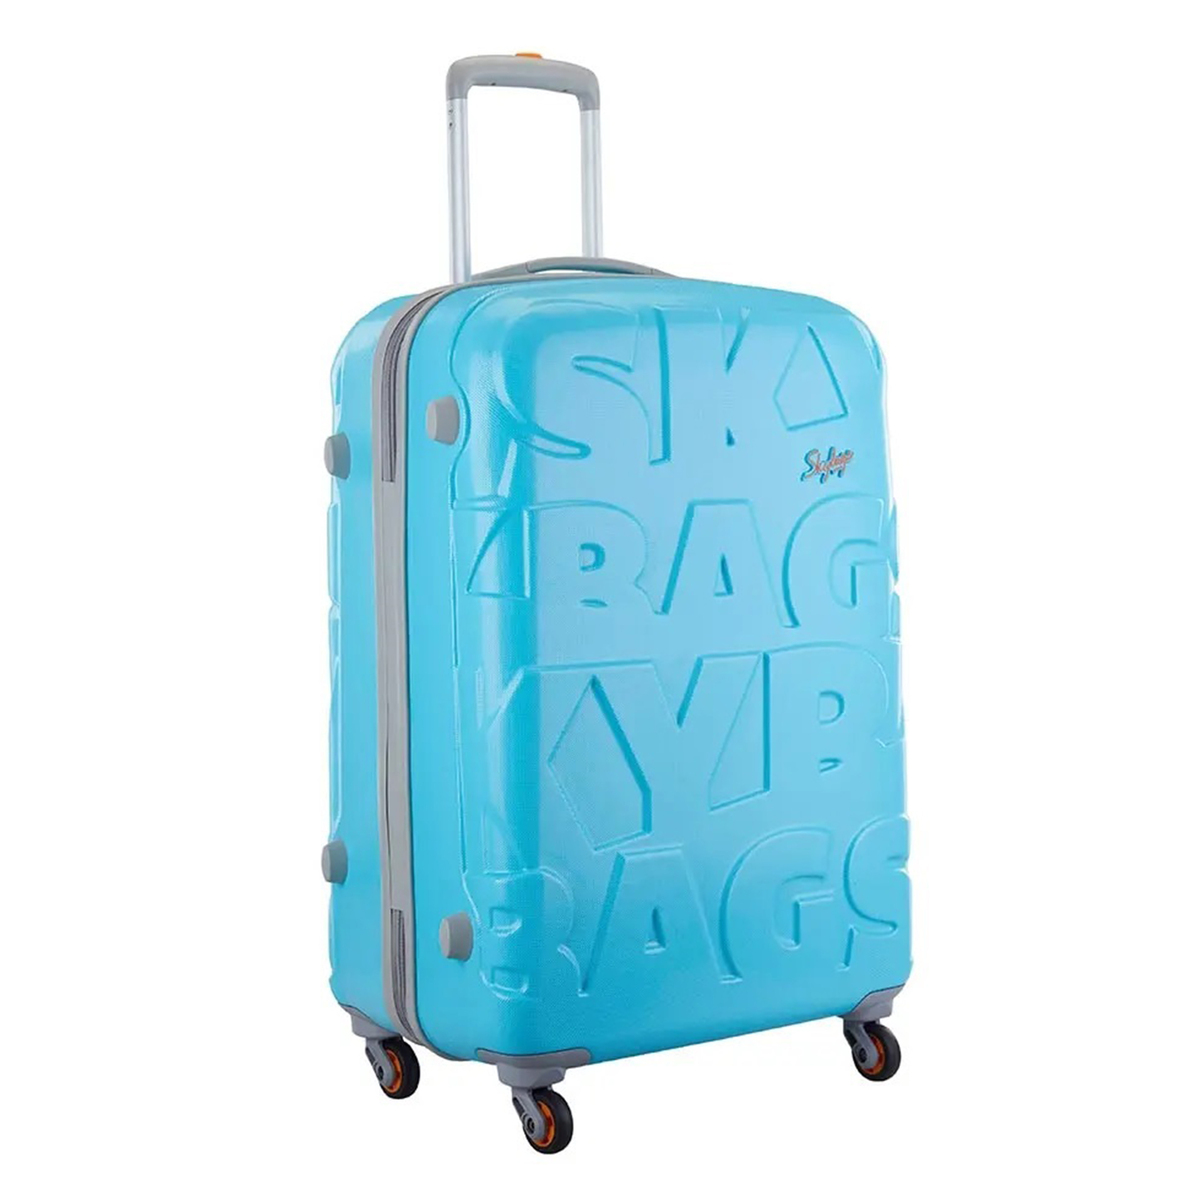 Skybags 4Wheel Hard Trolley Ramp 70cm Turquoise Blue